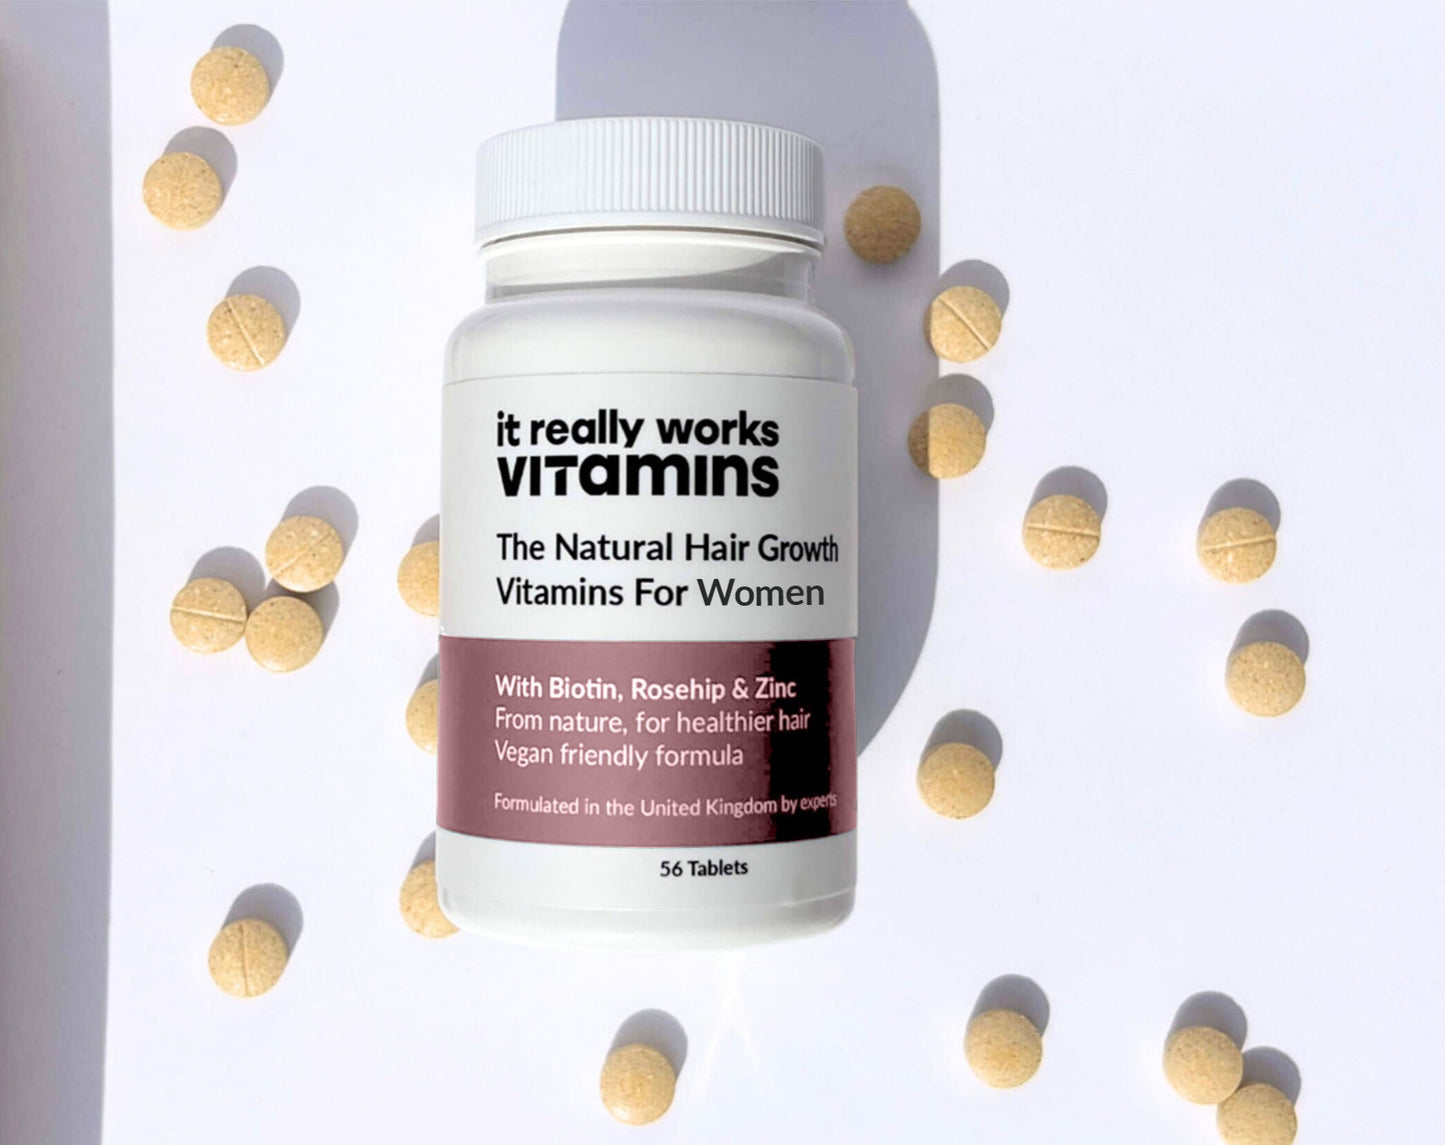 28 Day Supply Hair Vitamins for Women